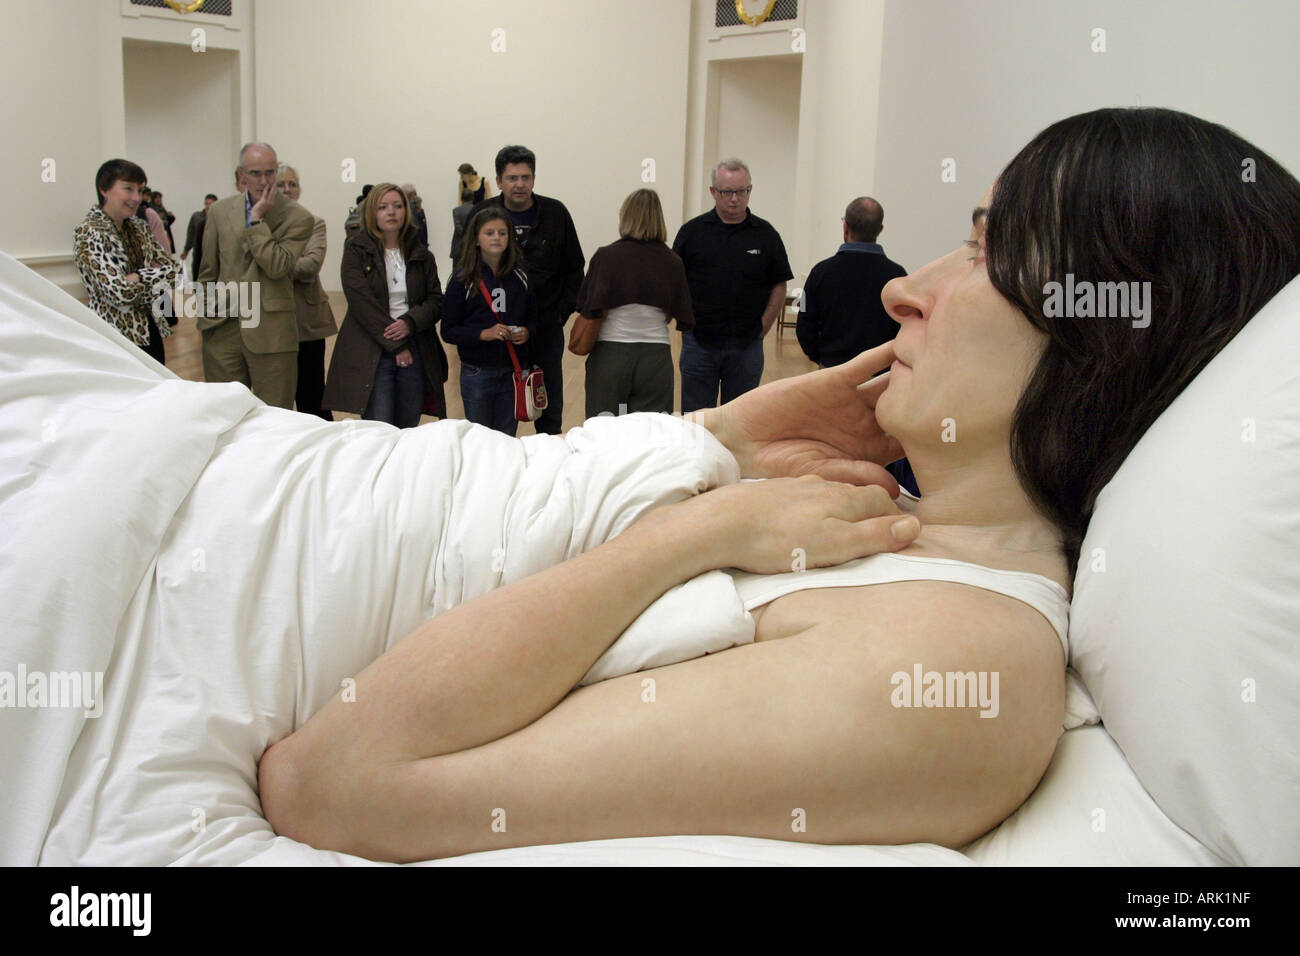 One of Ron Mueck s sculptures In Bed on show during the festival in Edinburgh Scotland August 2006 Stock Photo